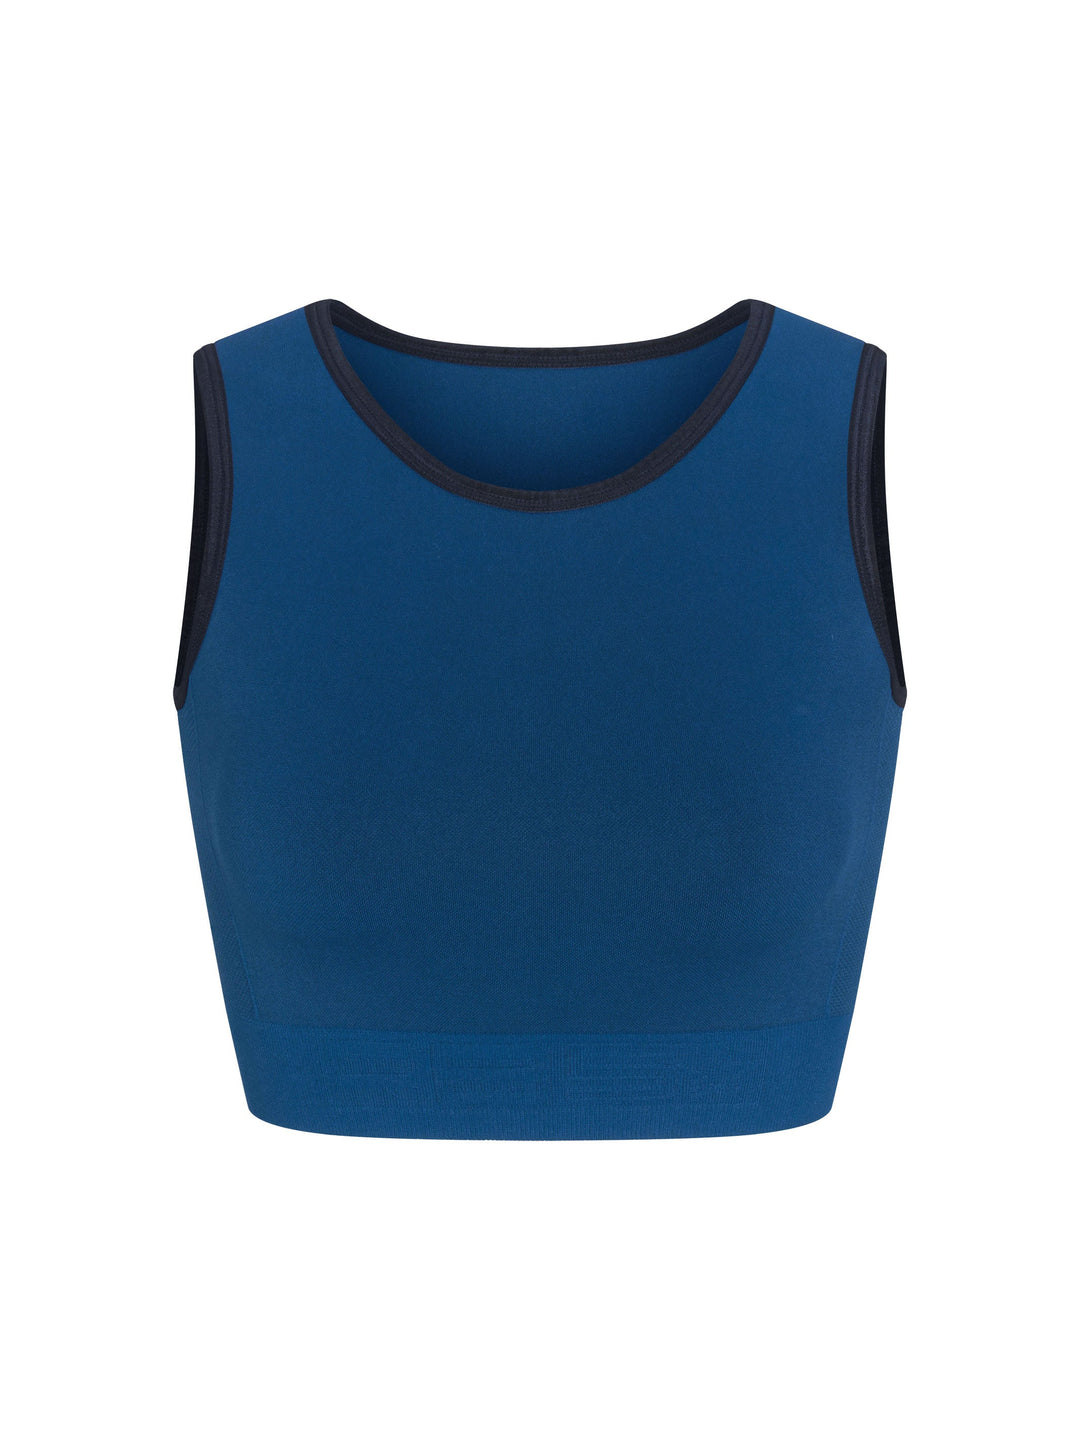 Compression Knit Sports Bra front view in Astral Blue